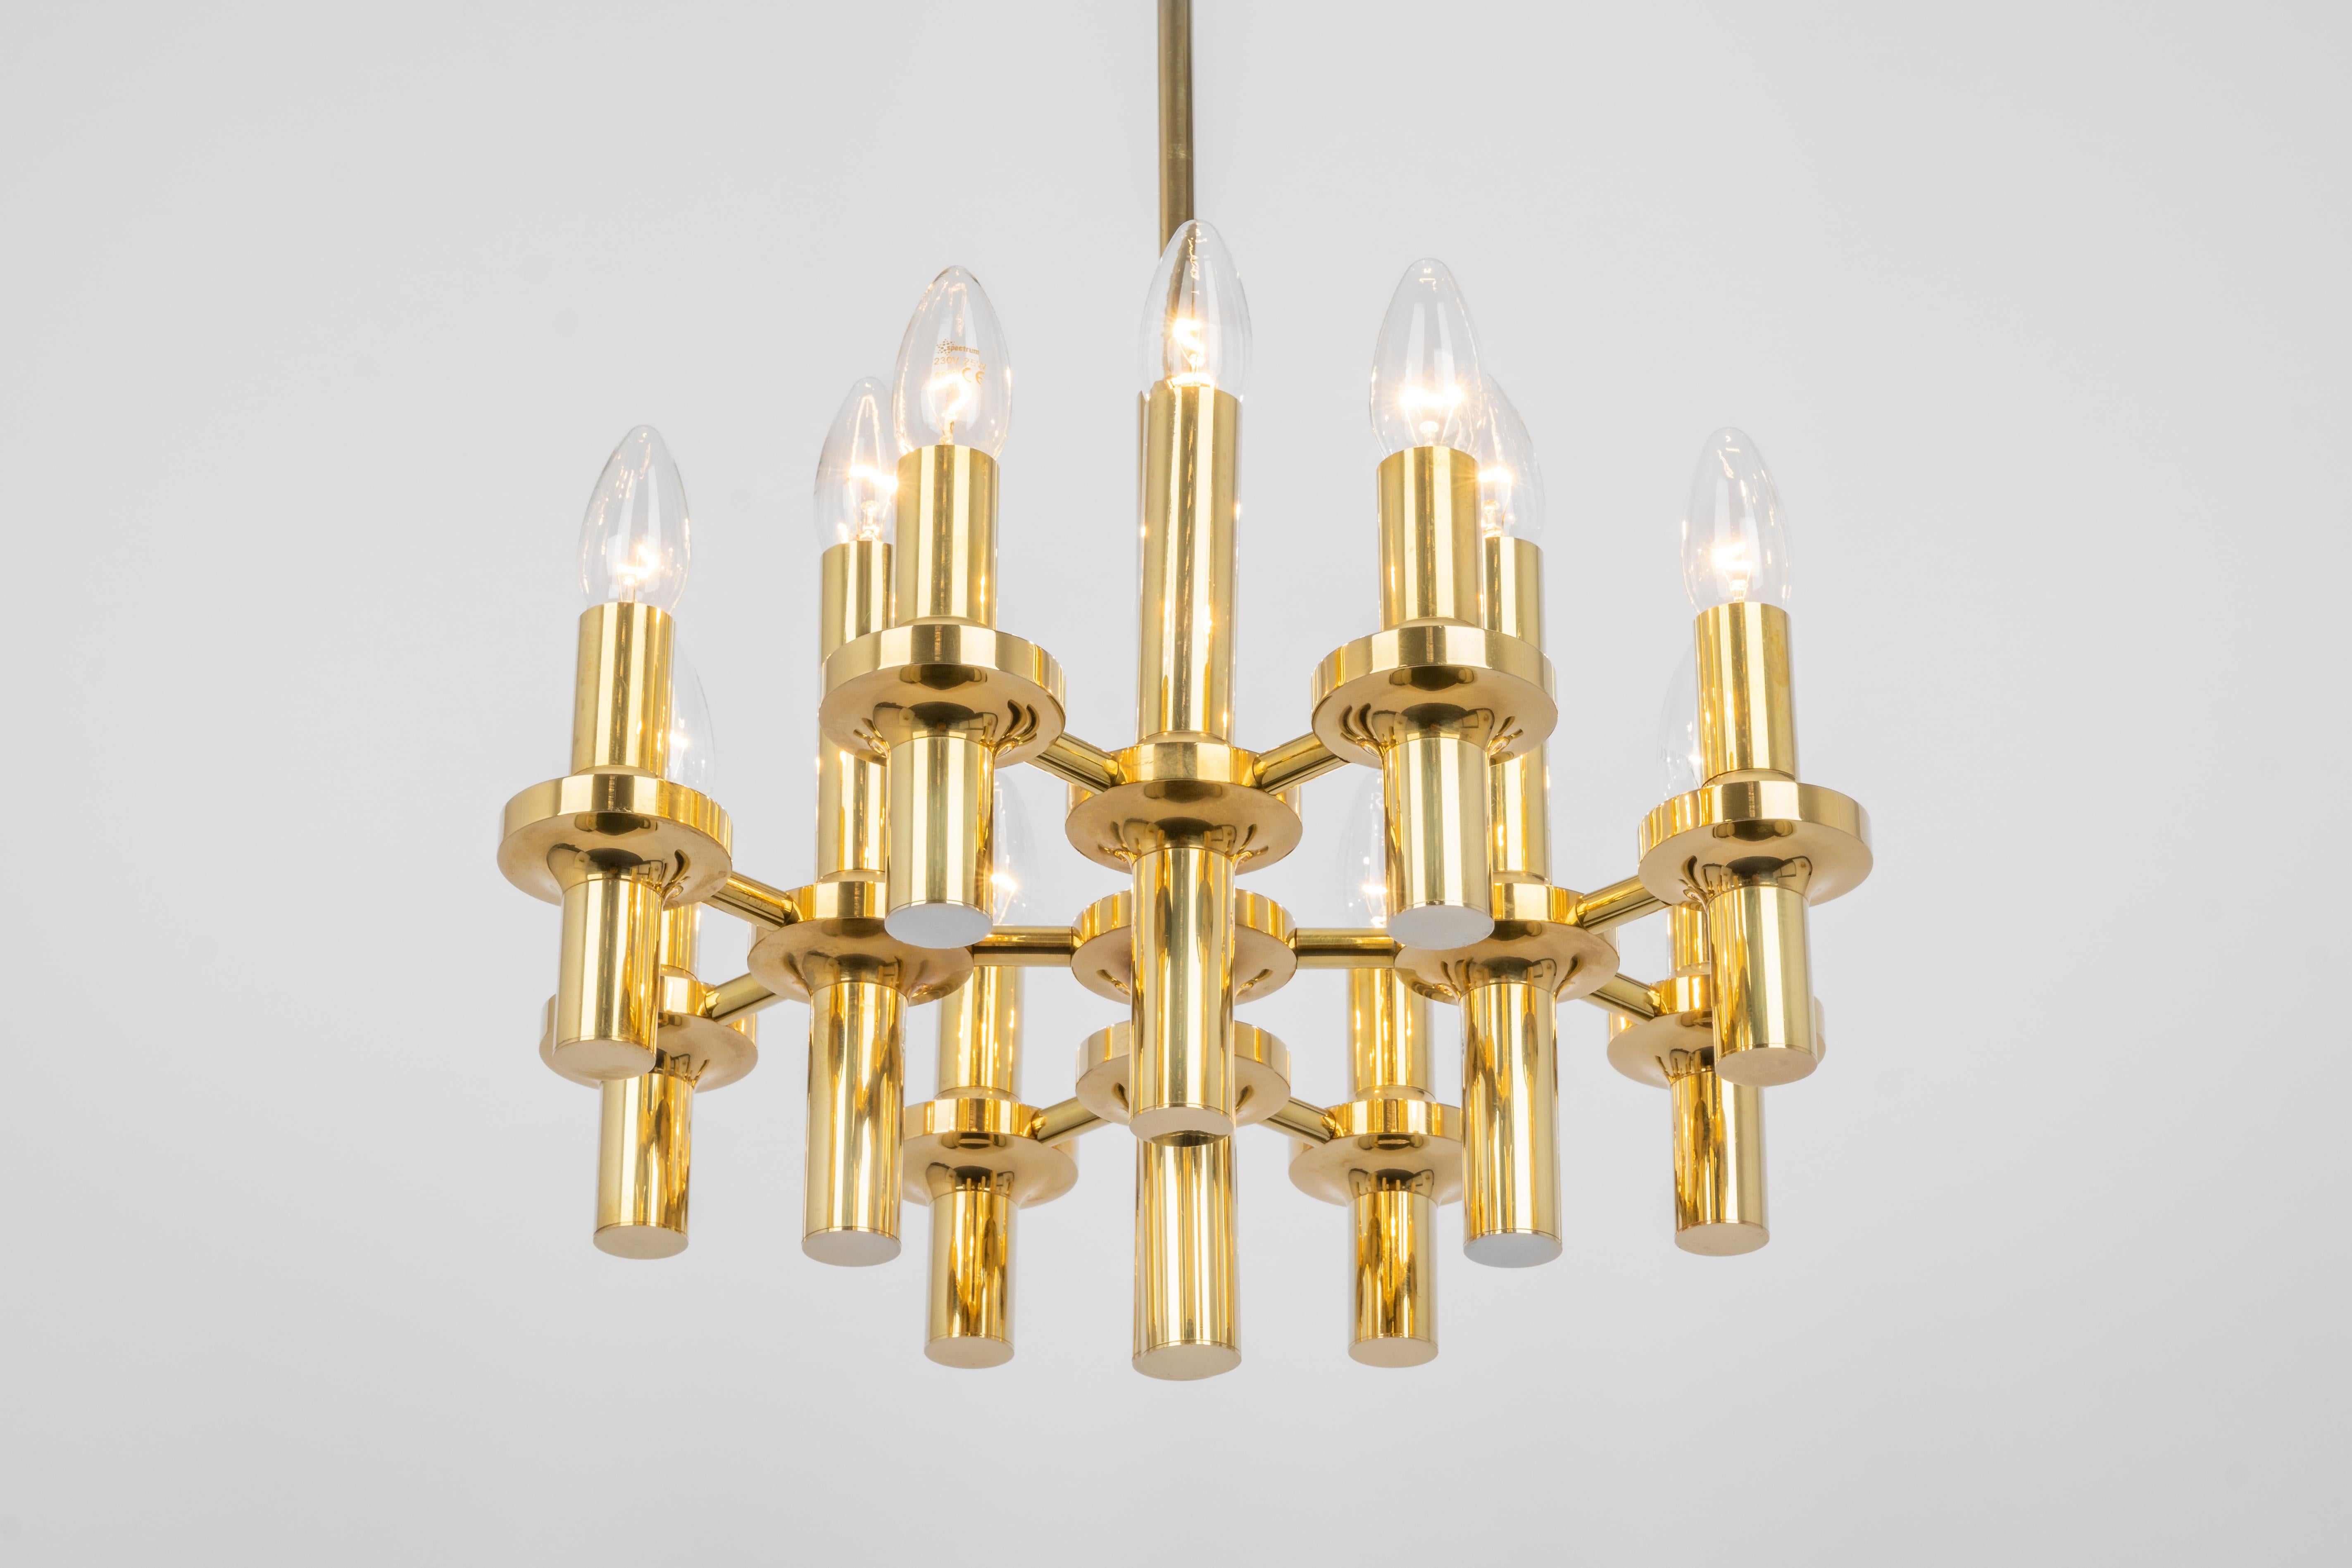 Wonderful midcentury brass chandelier in the manner of sciolari made by Staff Leuchten, manufactured in Germany, circa 1970s.

Sockets: 12 x E14 small bulbs./ max. 40 watt each-
Good condition.
Light bulbs are not included. It is possible to